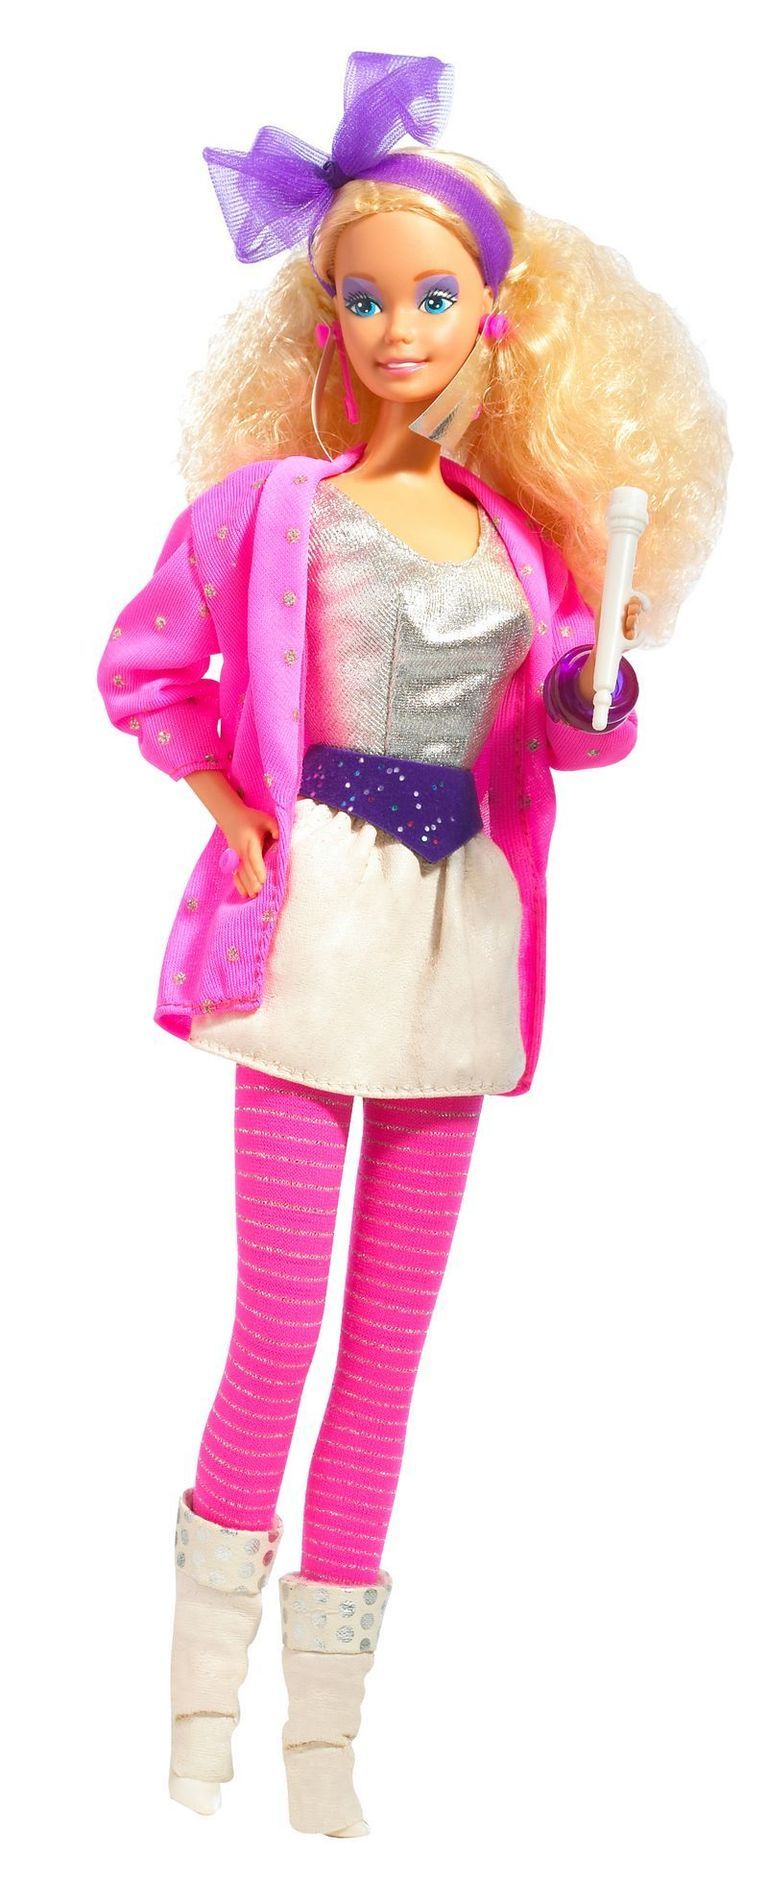 Magenta, Textile, Joint, Pink, Wig, Fashion, Purple, Violet, Costume, Toy, 